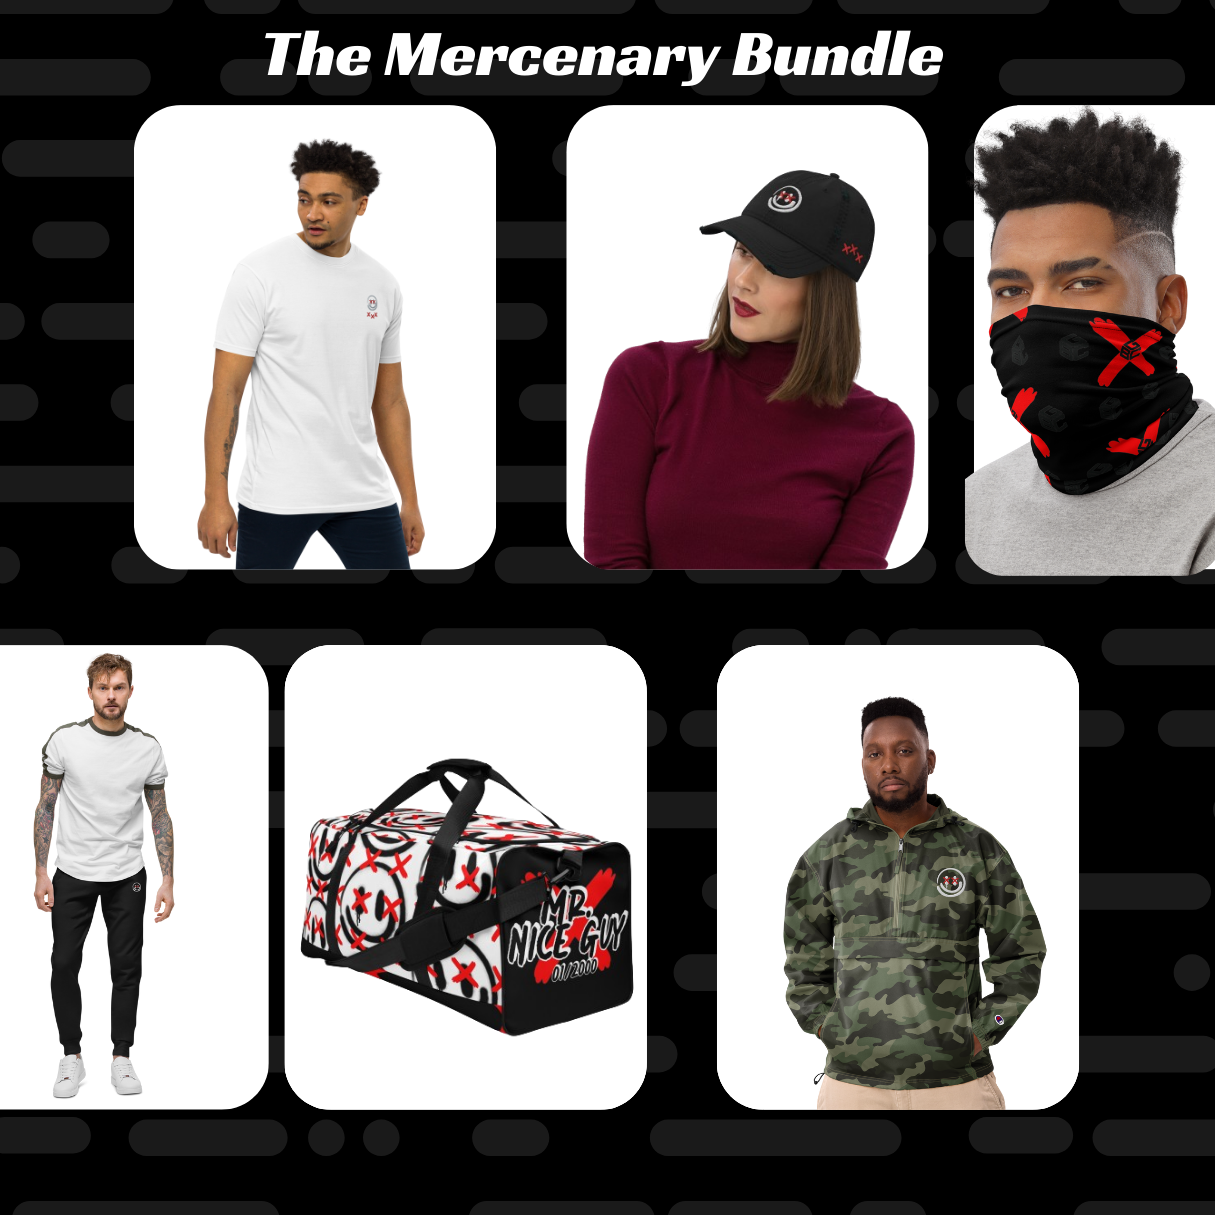 GBC "Mr. Nice Guy" Limited Red X Edition Mercenary Bundle *$5,000 Giveaway Entry